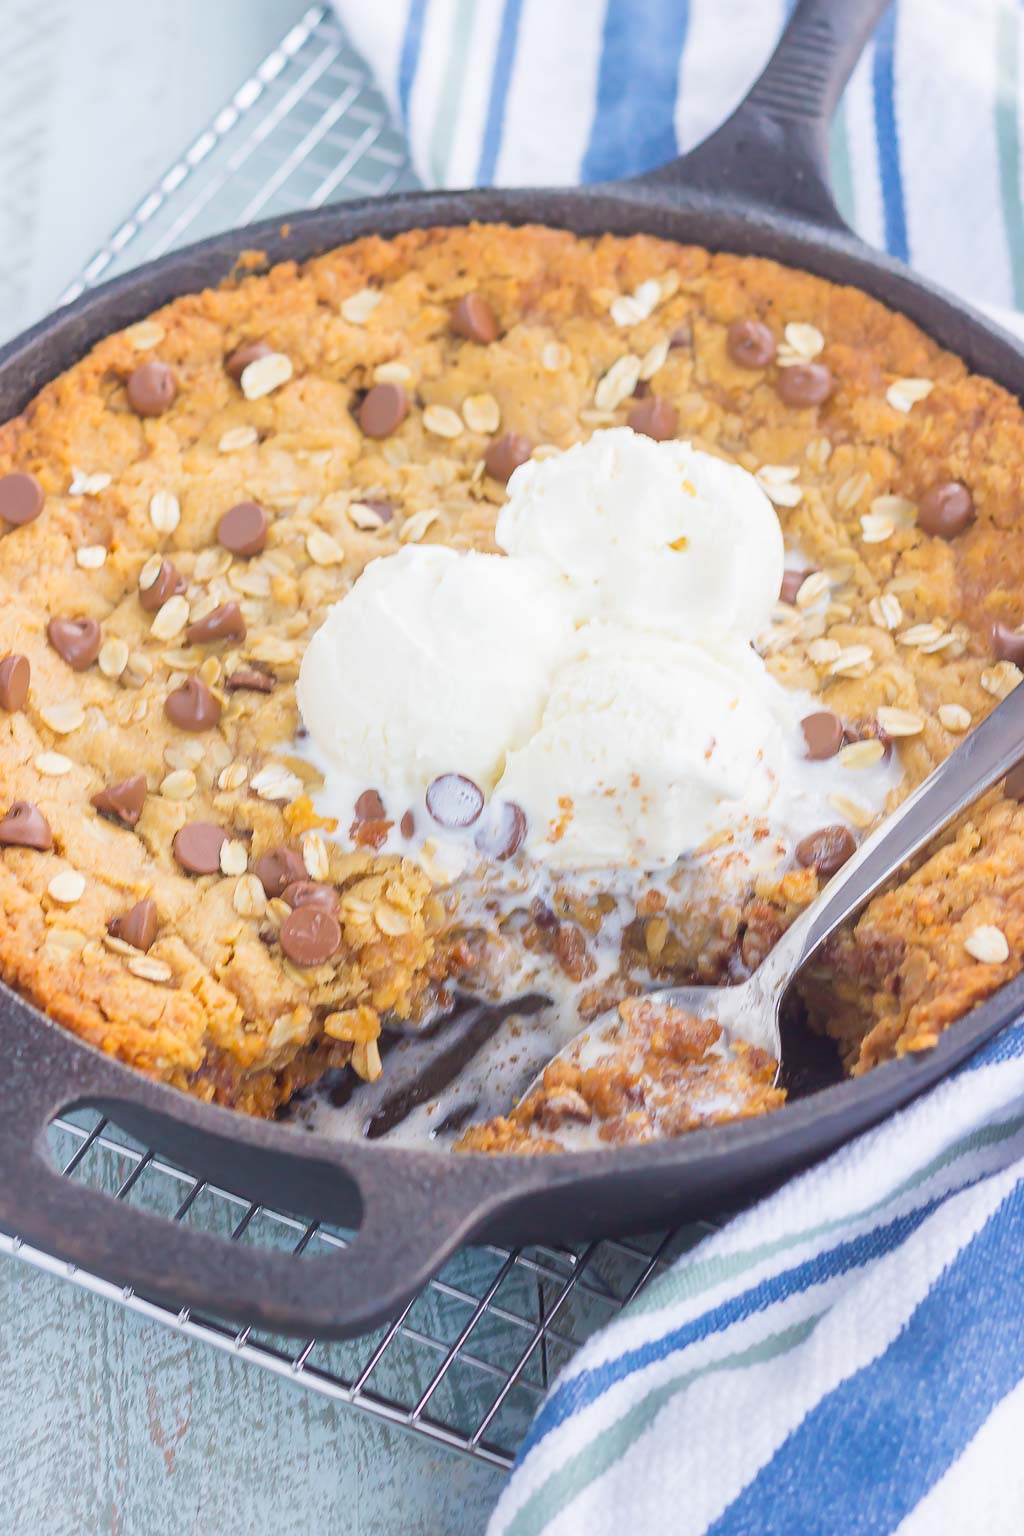 You won't be able to resist this warm, thick, and fudgy Peanut Butter Chocolate Chip Skillet Cookie. Packed with creamy peanut butter, hearty oats, and chocolate chips, this cookie is packed with flavor and is perfect when served with a big scoop of vanilla ice cream!